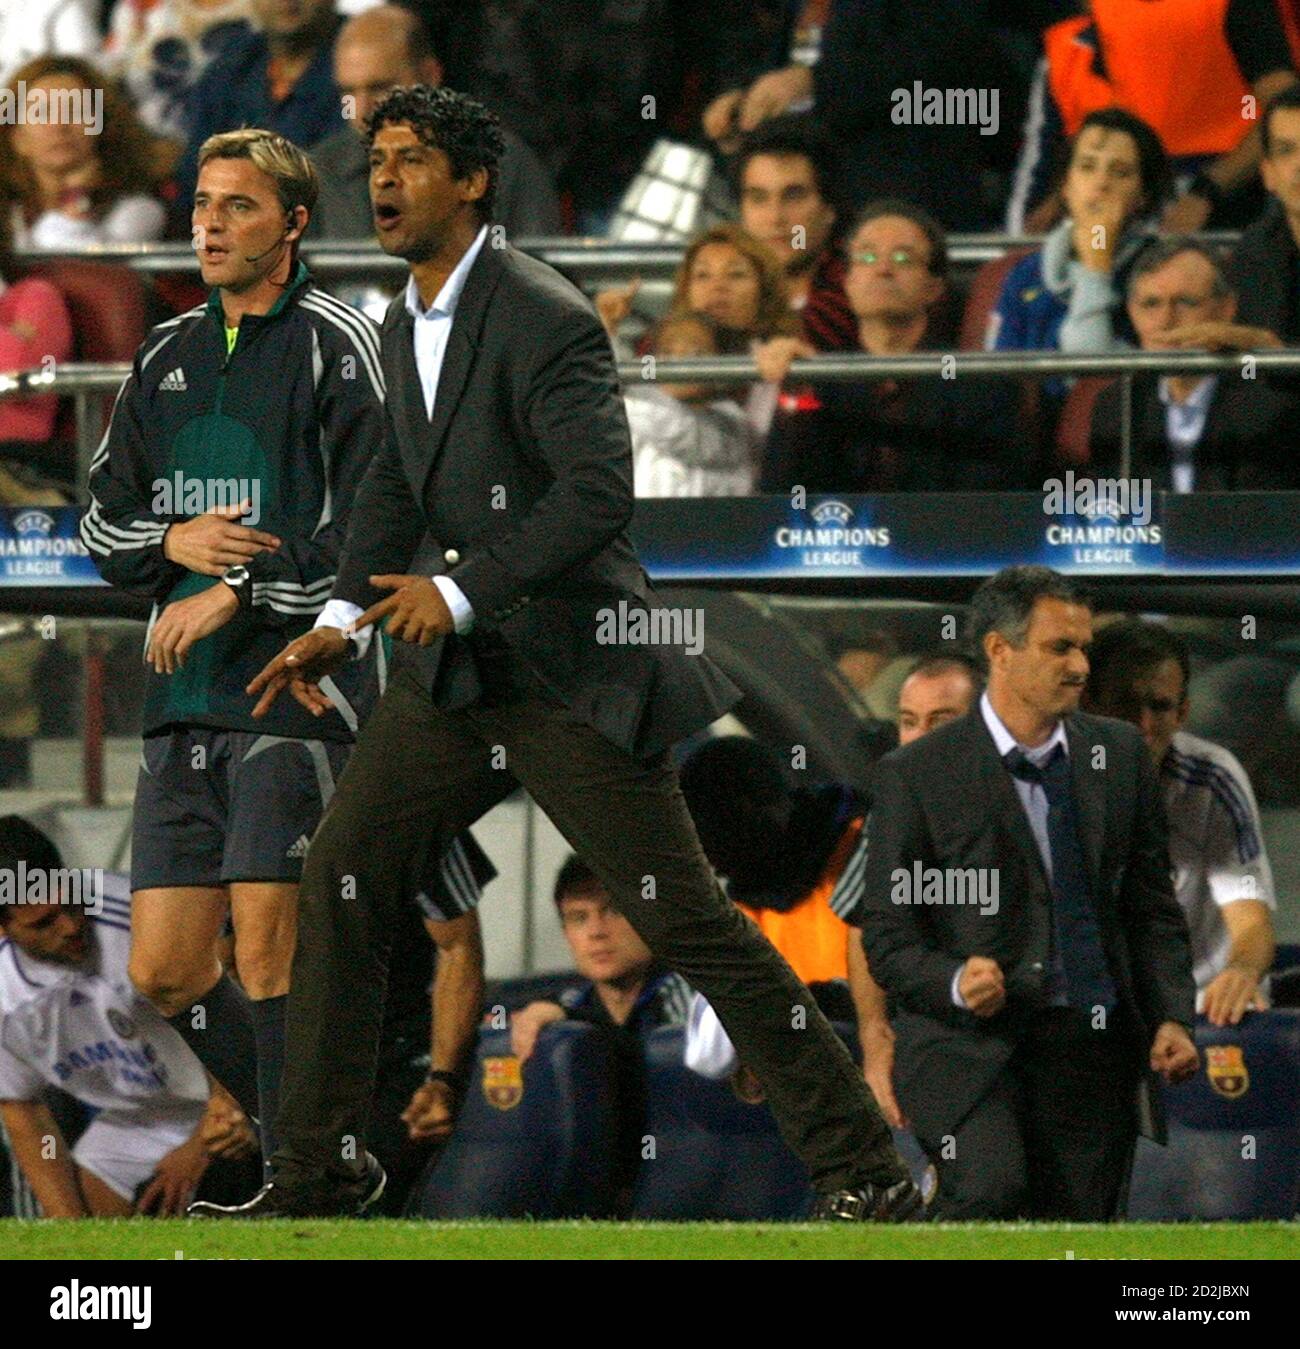 Chelsea's coach Jose Mourinho (R) celebrates as Barcelona coach Frank  Rijkaard (2nd L) reacts as the final whistle is blown in their Champions  League Group A soccer match at the Nou Camp